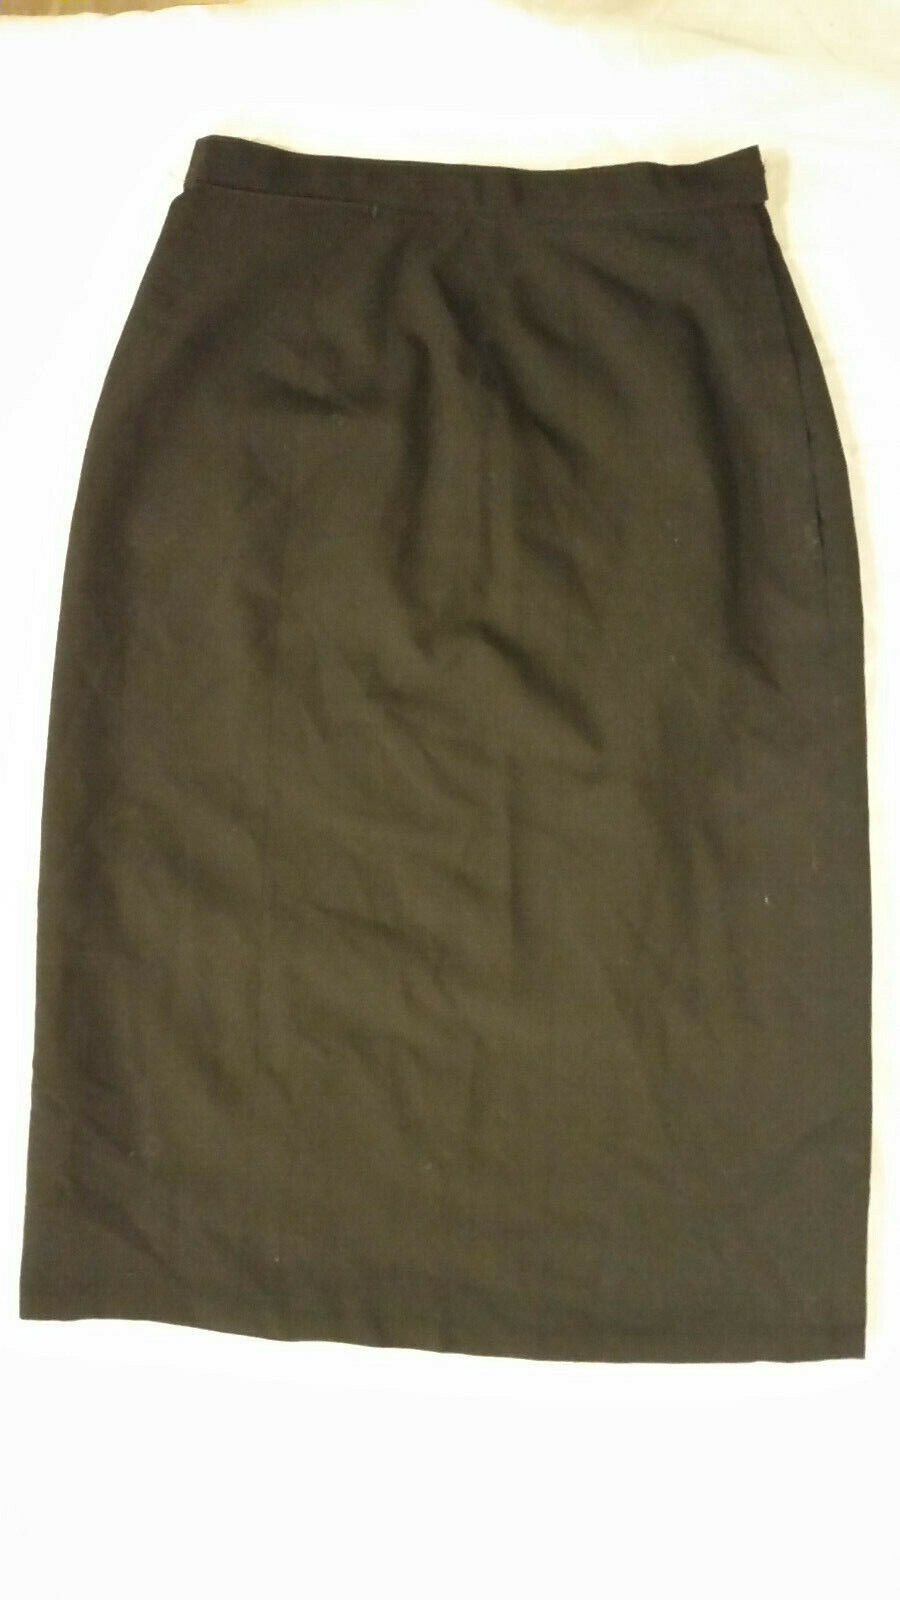 USN NAVY REGULATION BLACK SKIRT NO TAGS 23 X 25.5 SEE MEASUREMENTS IN PICTURES